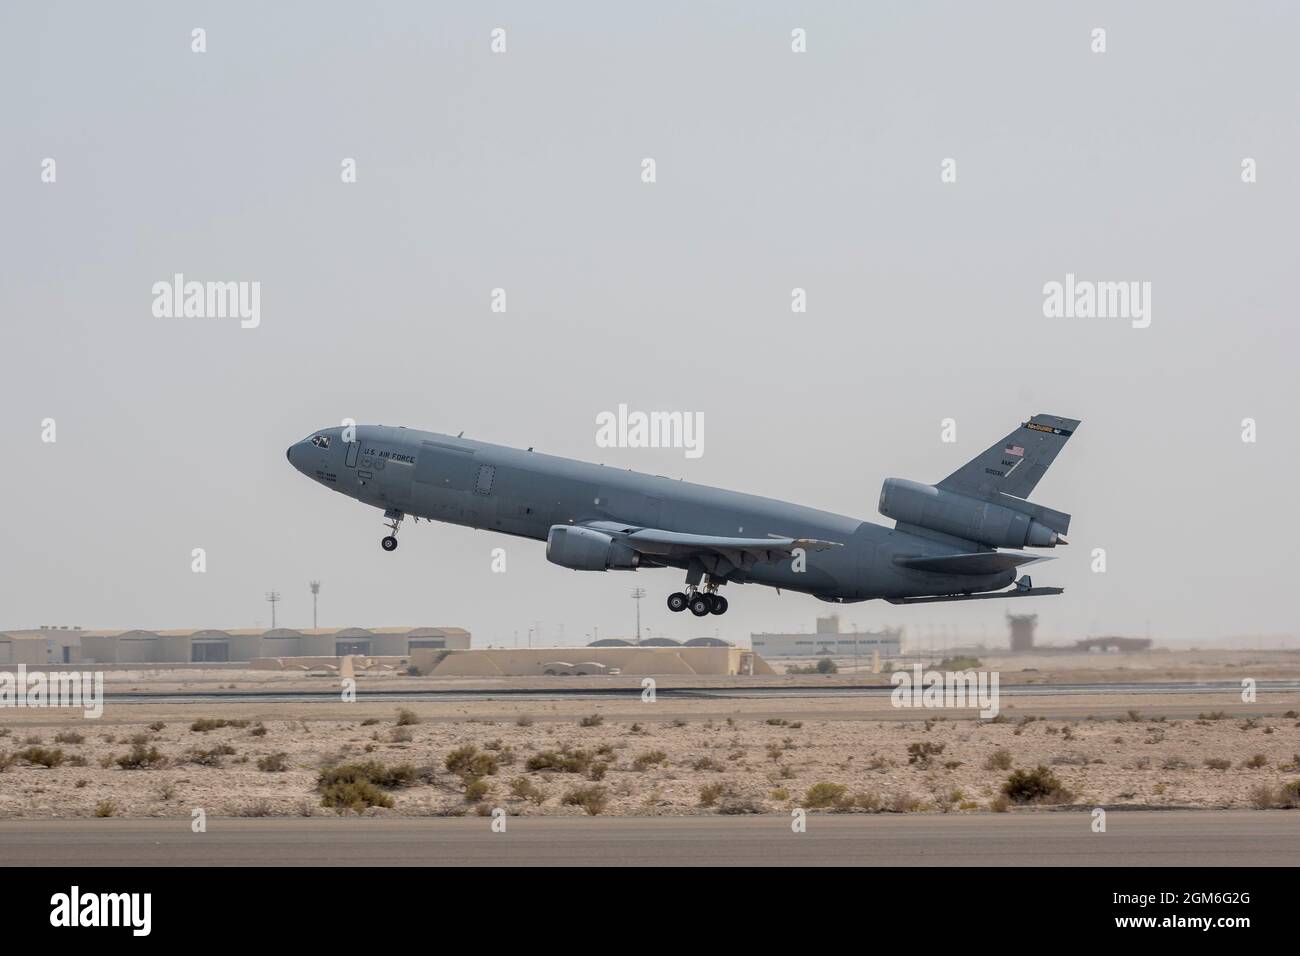 A U.S Air Force KC-10 Extender, assigned to the 908th Expeditionary Refueling Squadron, takes off from Al Dhafra Air Base, United Arab Emirates in support of the non-combatant evacuation, Aug 30 2021. The Department of Defense is committed to supporting the evacuation of American citizens, special immigrant visa applicants and other at-risk individuals from Afghanistan. (U.S. Air Force photo by Master Sgt. Wolfram M. Stumpf) Stock Photo